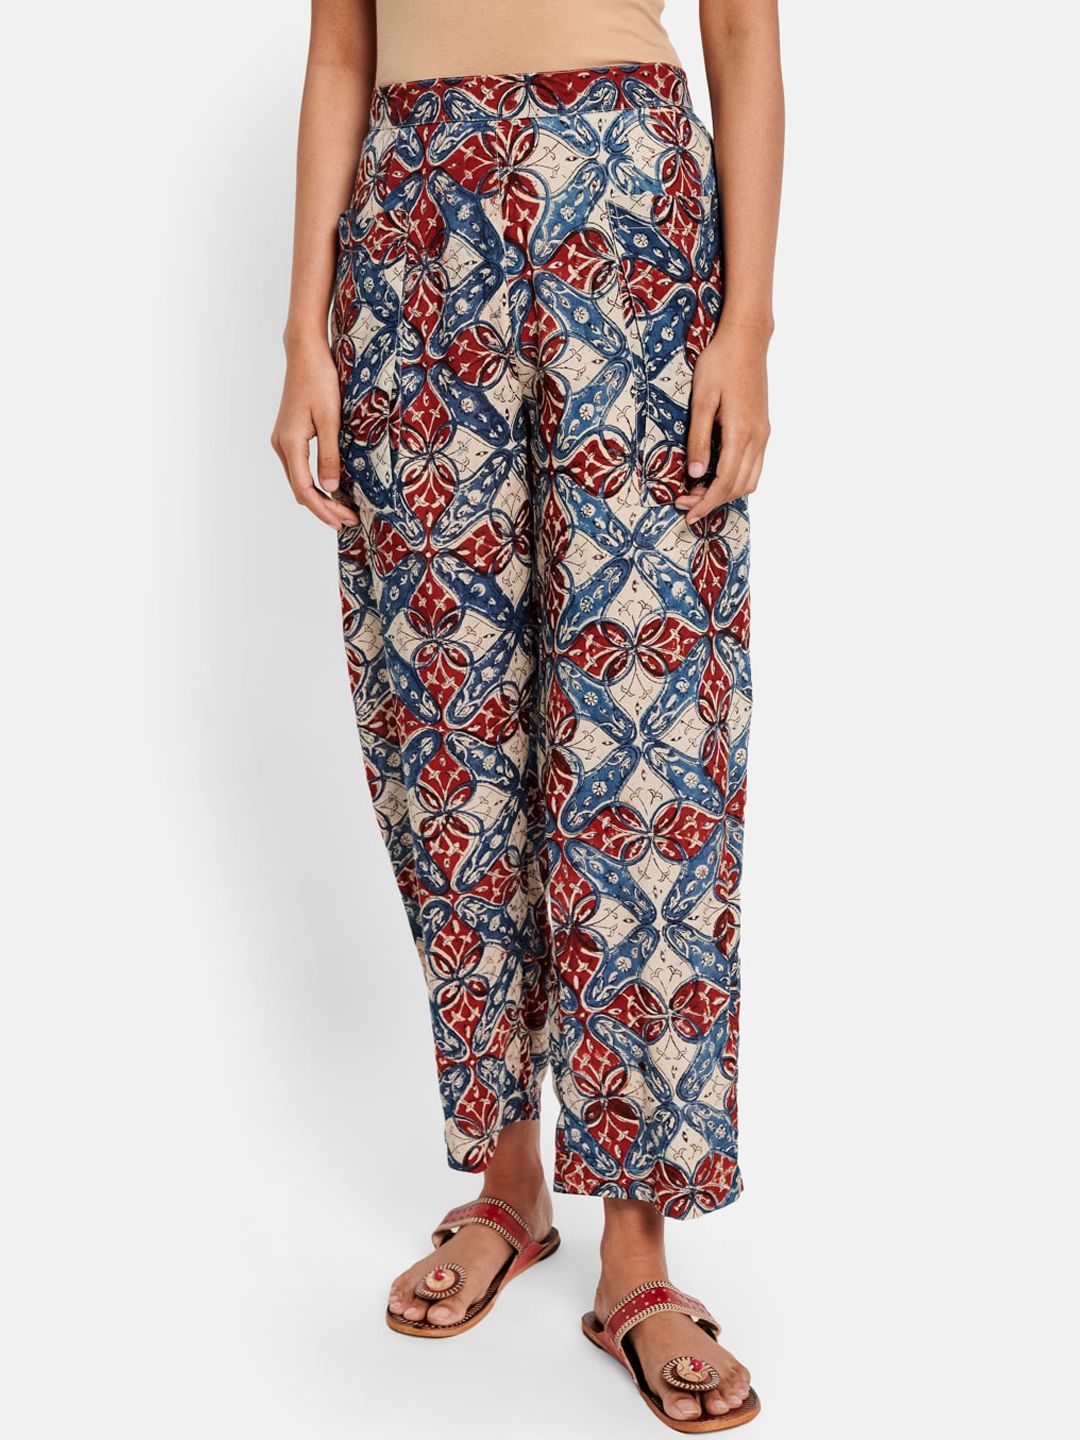 Fabindia Women Red & Blue Floral Printed Regular Fit Trousers Price in India